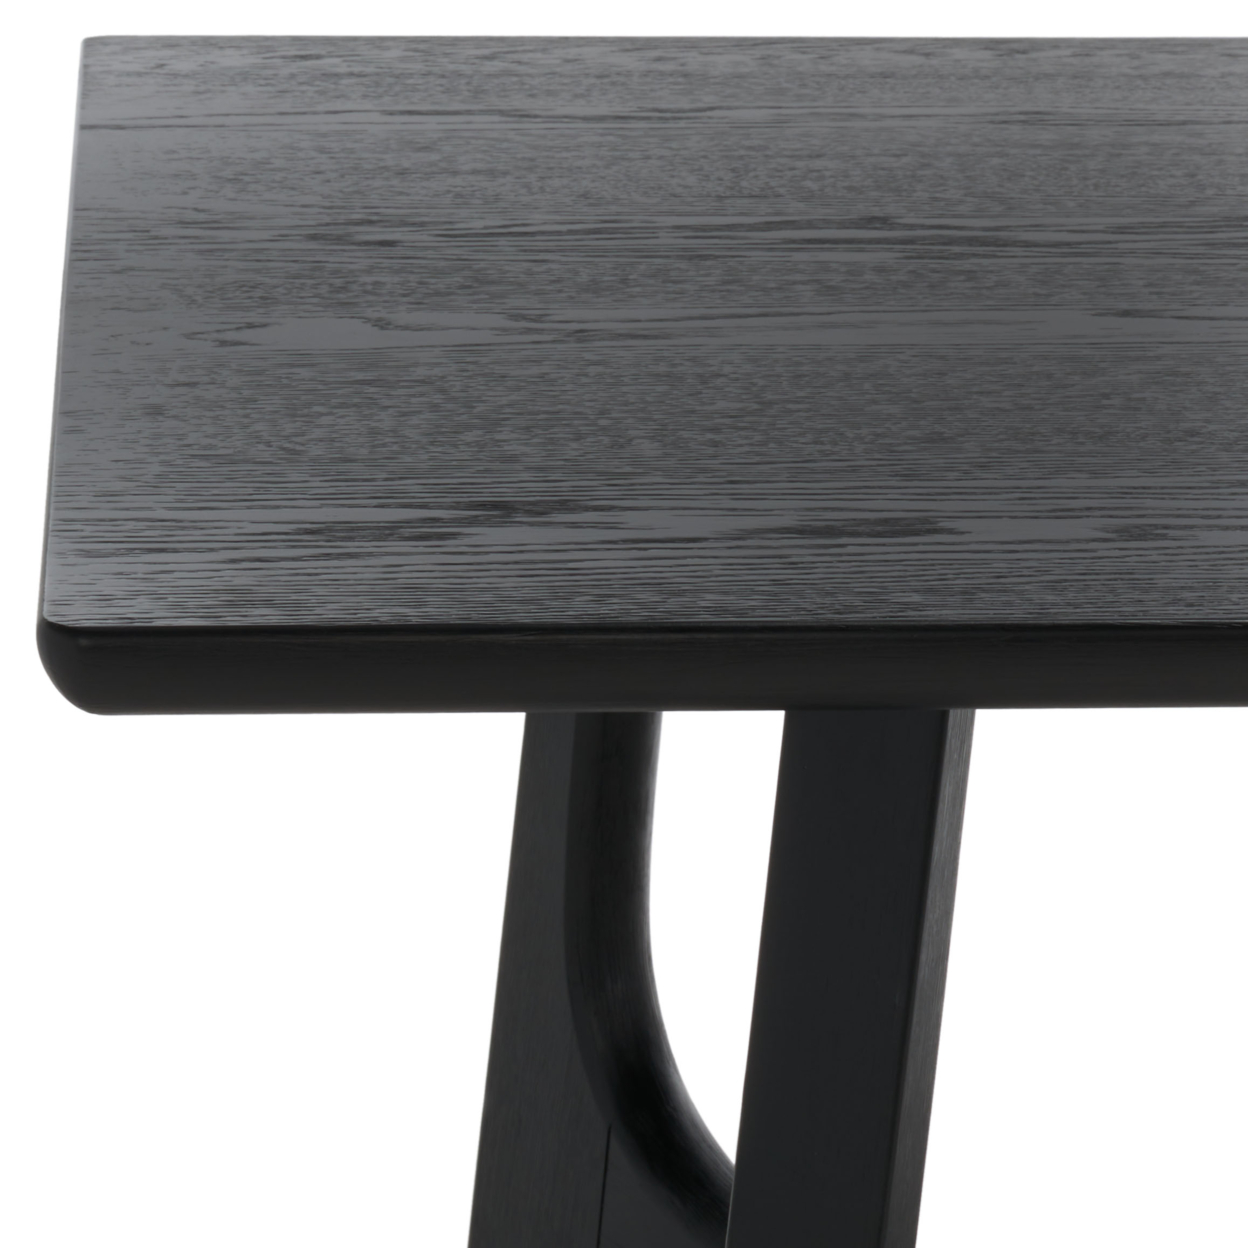 SAFAVIEH COUTURE Adelee Wood Rectangle Dn Table Black